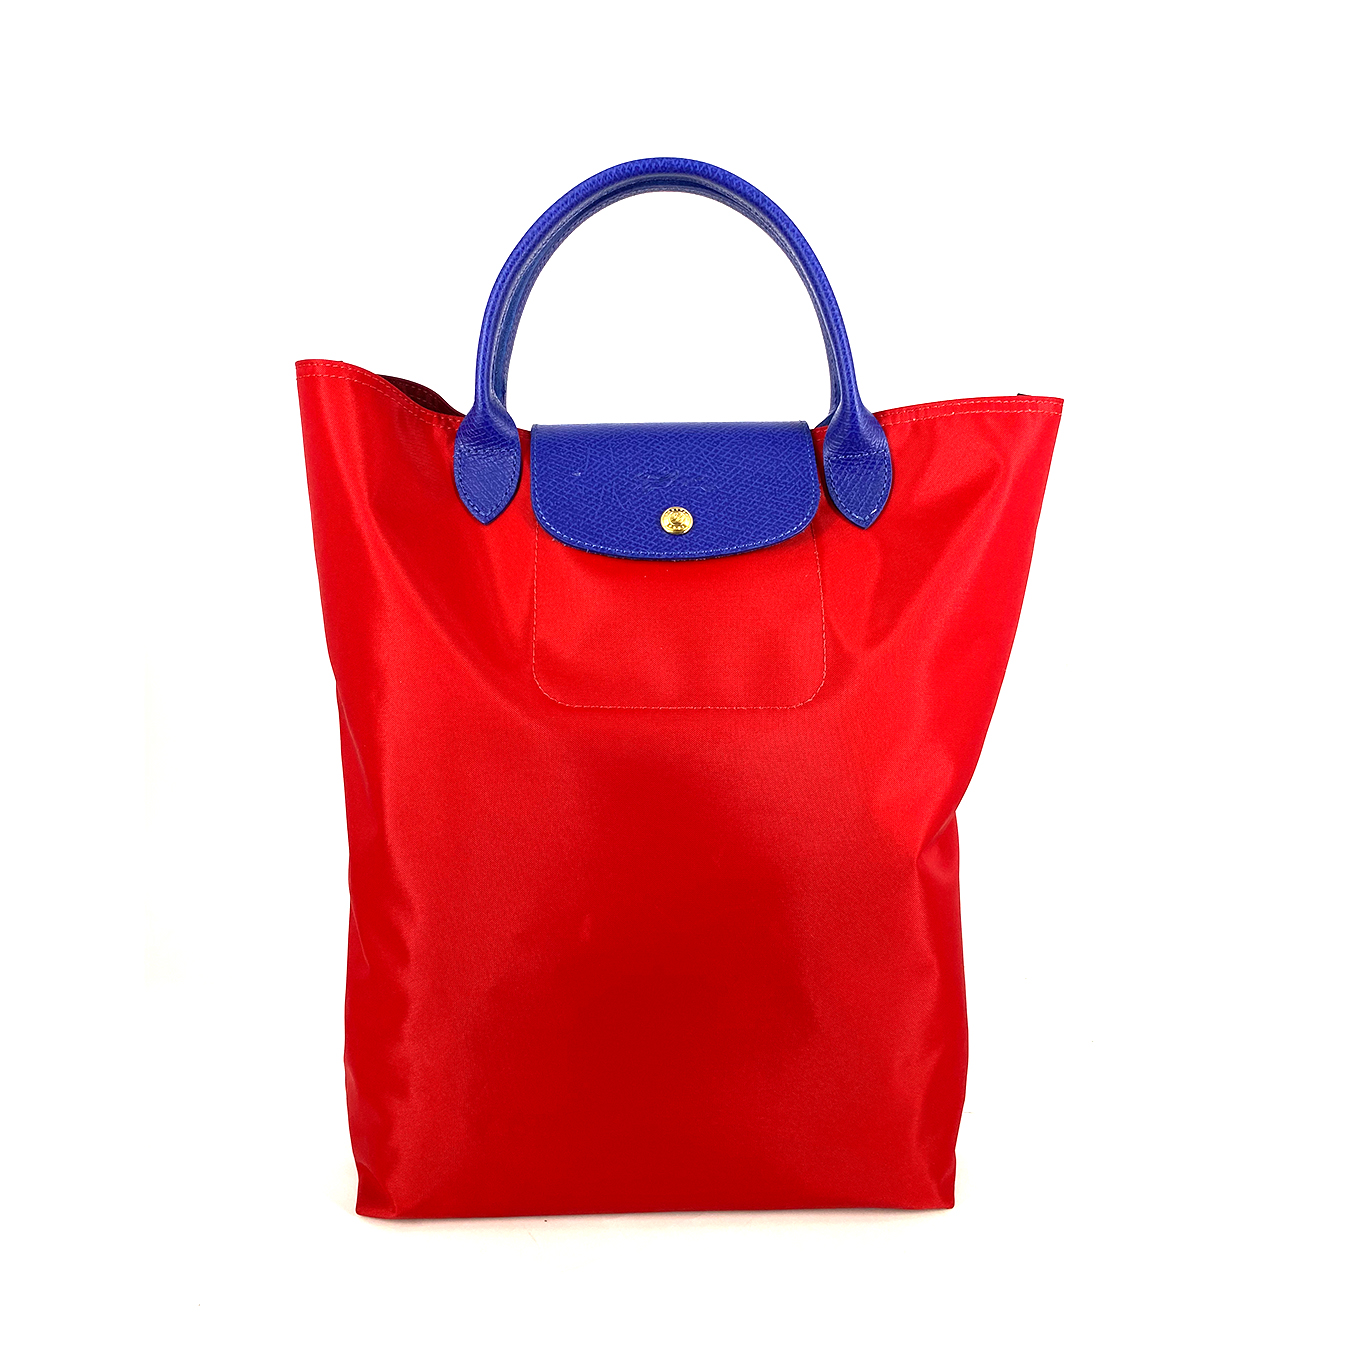 Longchamp Le Pliage Replay Top Handle Red Maroon